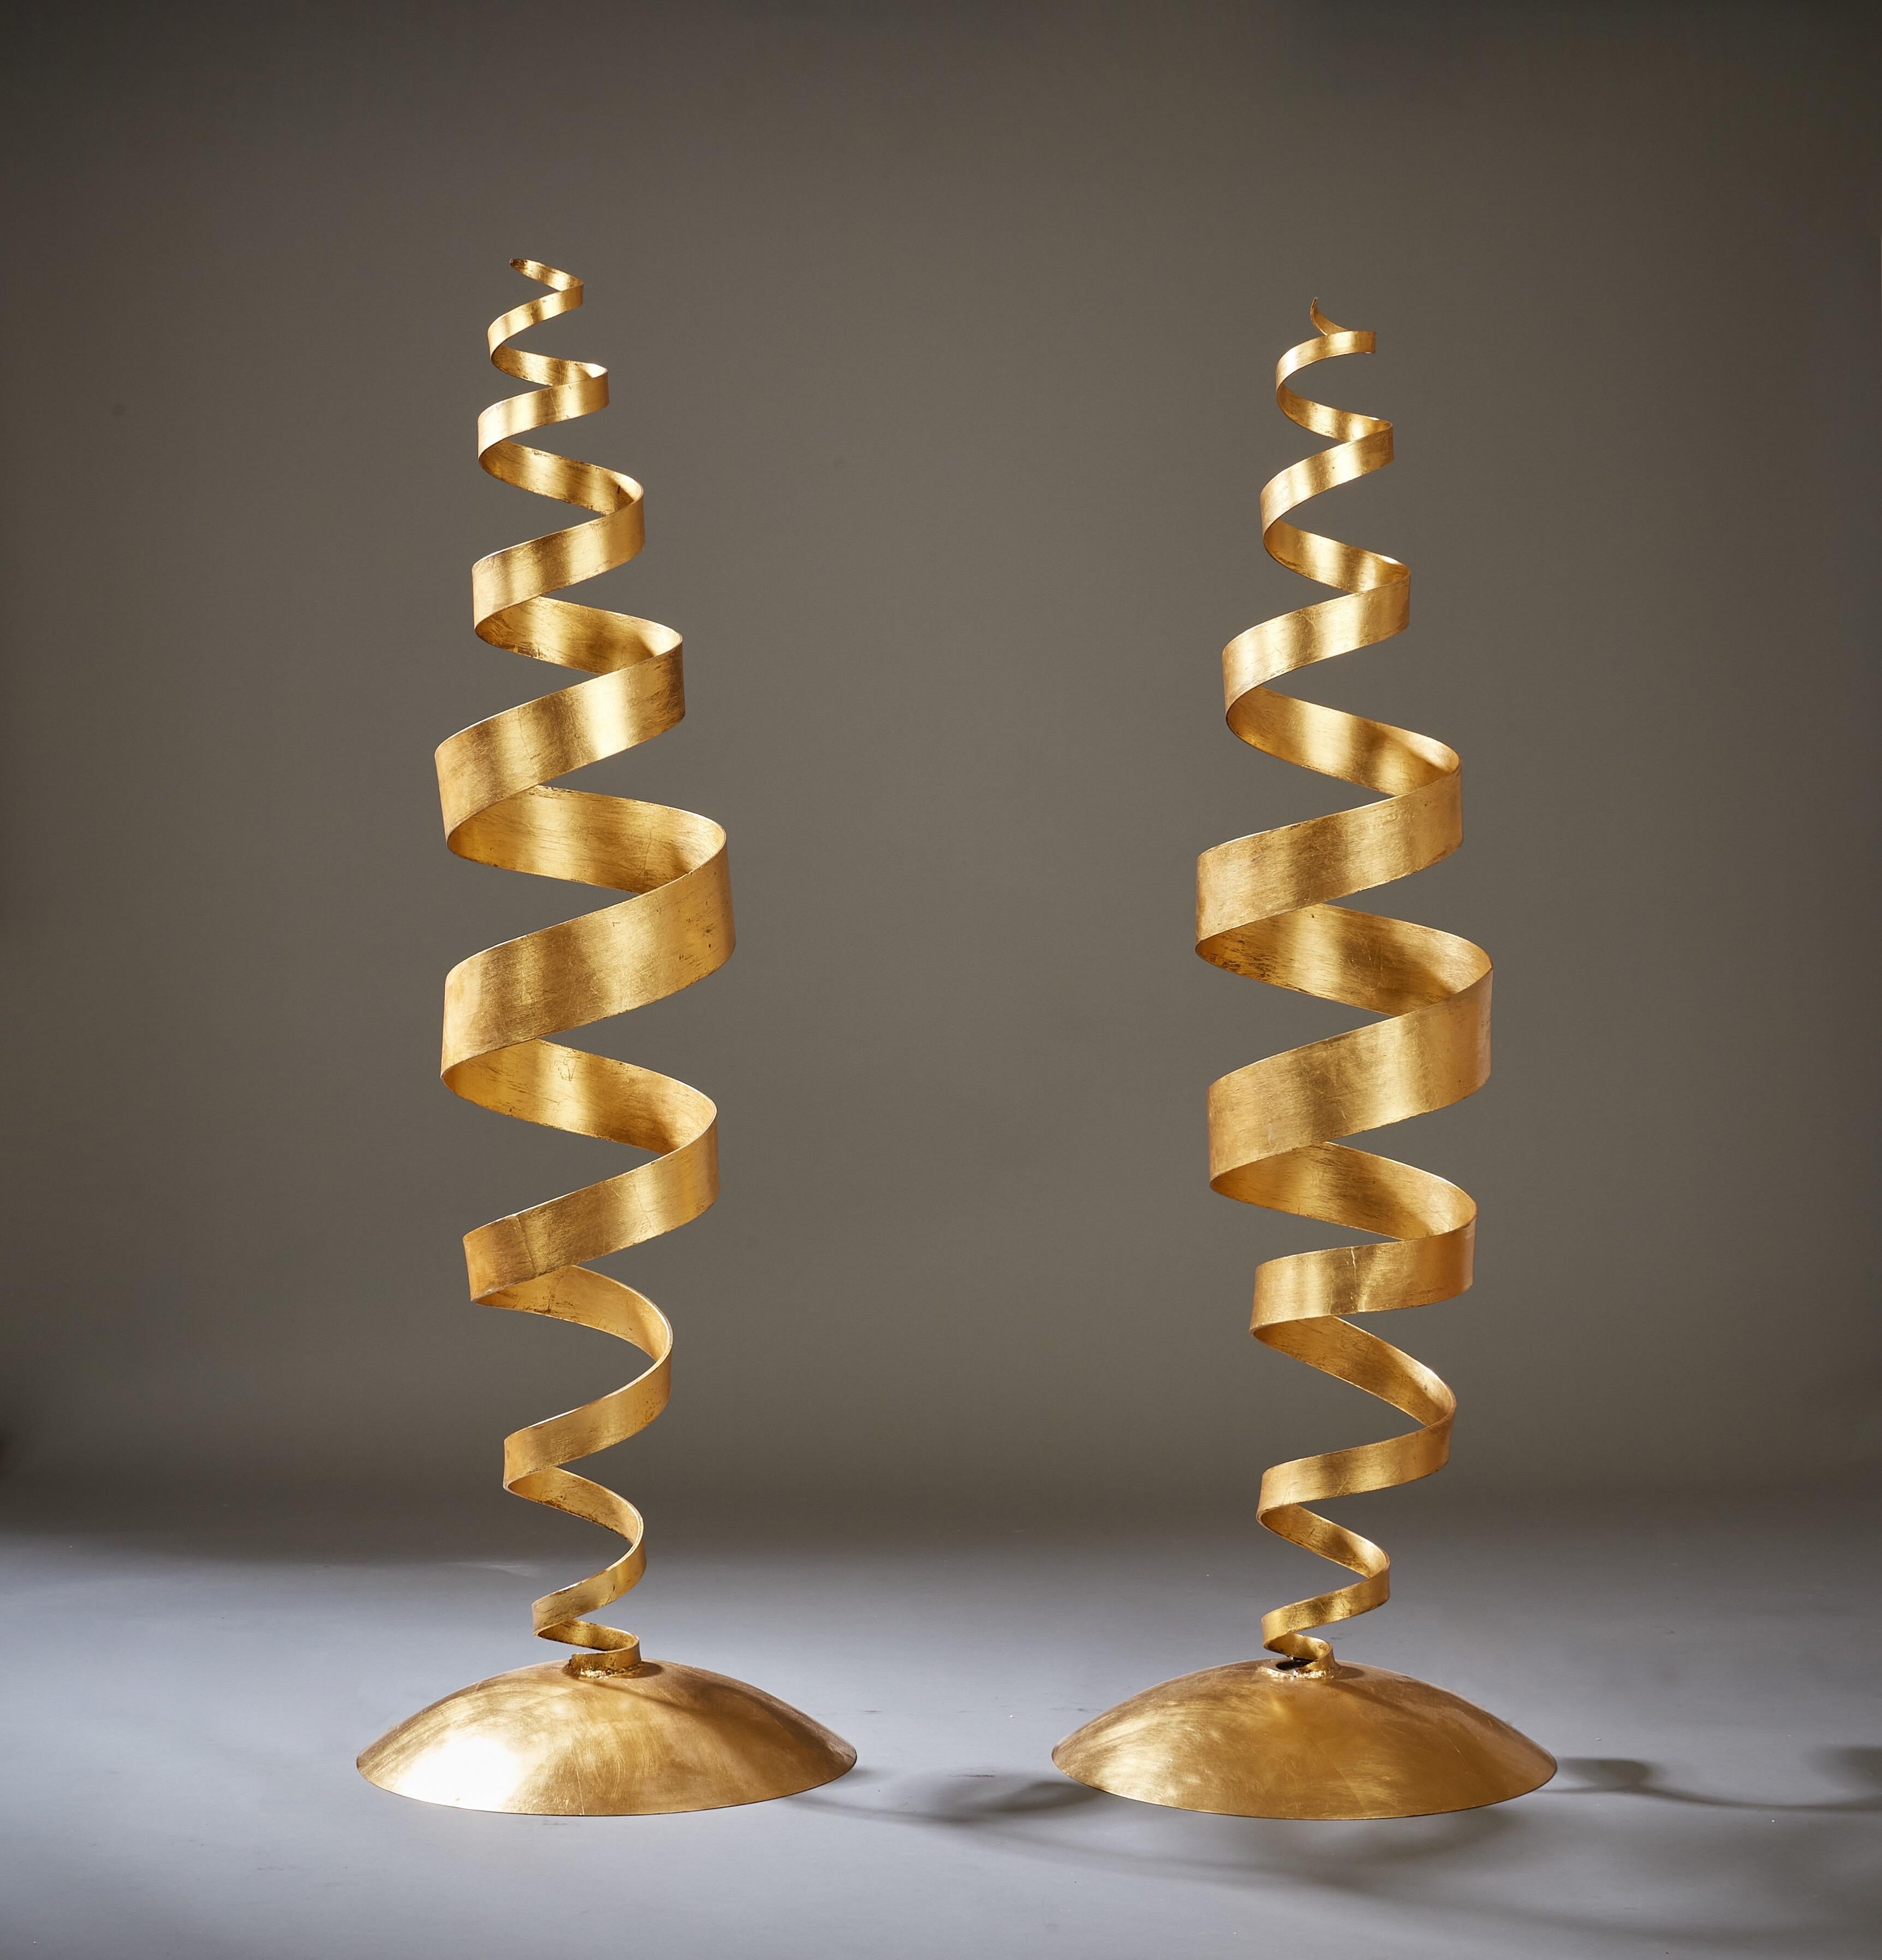 Tom Dixon (b. 1959)

An early, highly spirited pair of spiral floor lamps by designer Tom Dixon OBE, in spun steel covered in hand-applied gold leaf. Undulating coils rising out of gilt domed bases that each cradle a hidden bulb, these interactive,